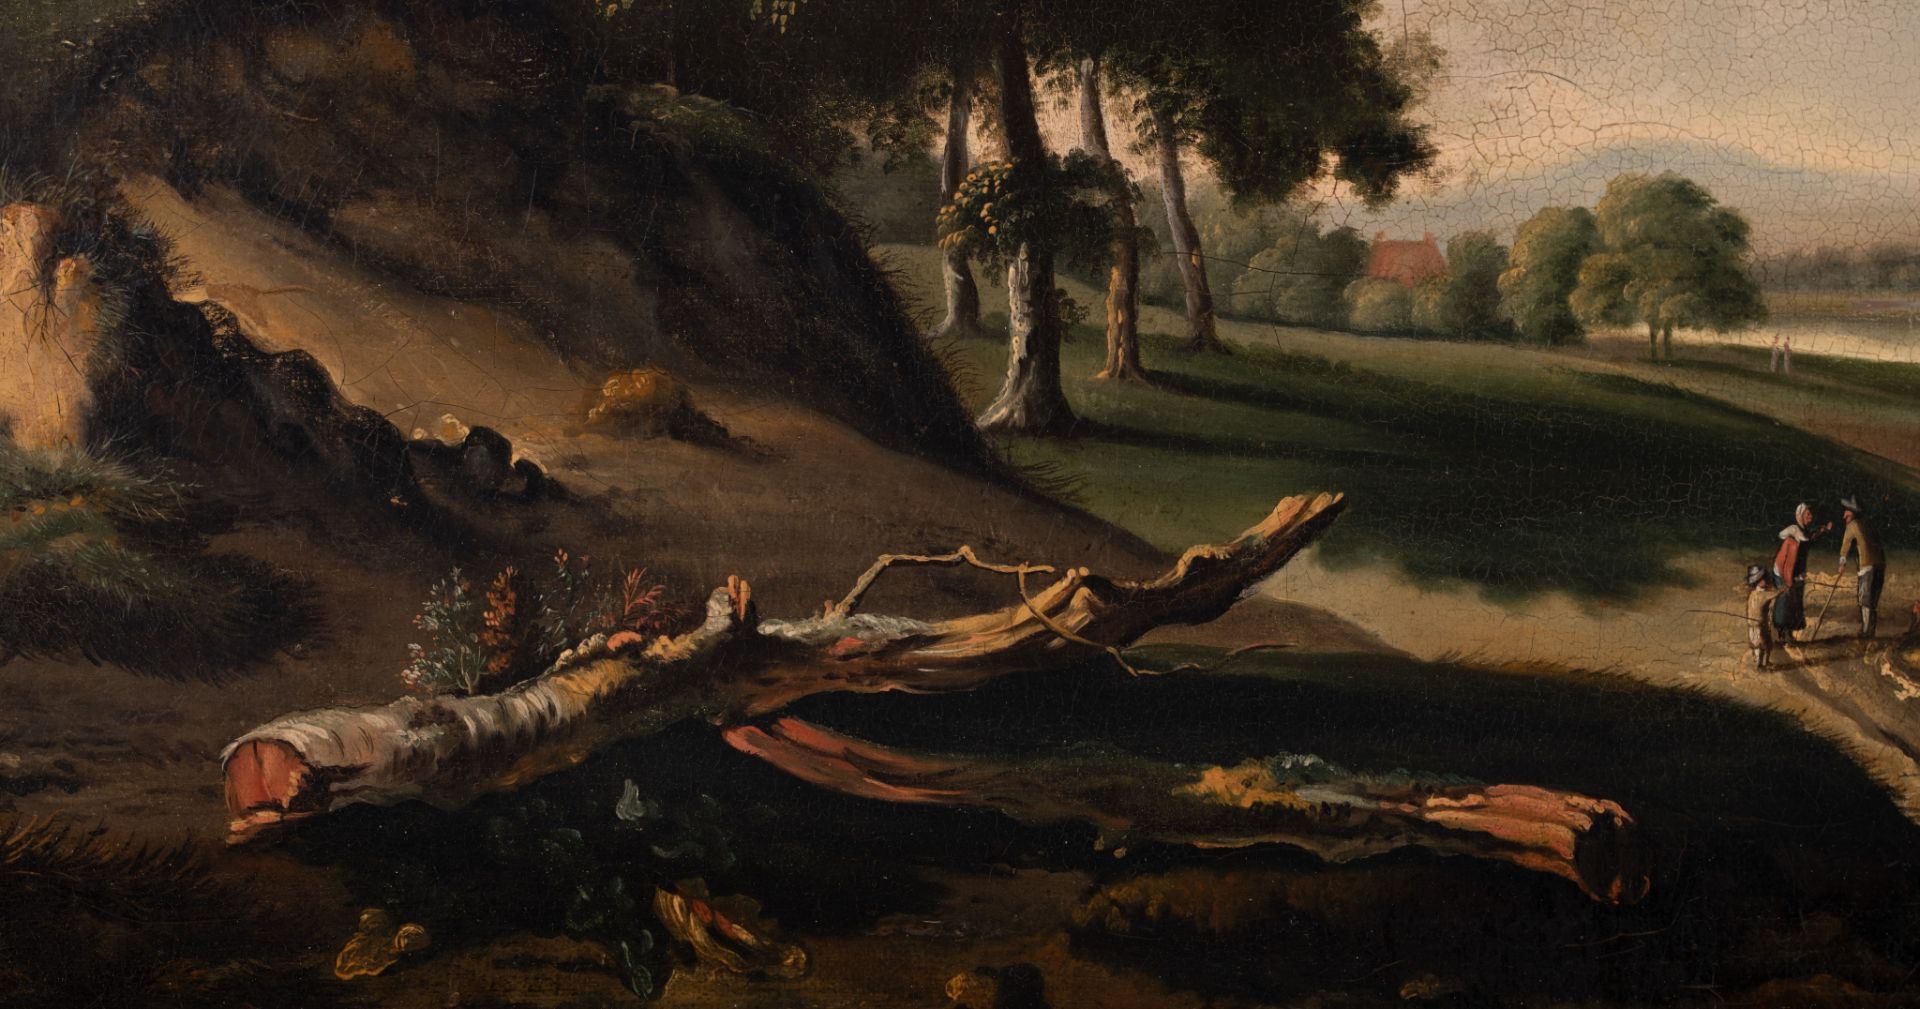 19thC copy after Jan Weynants (1632-1684), landscape with figures, oil on canvas, 45 x 56 cm - Image 5 of 7